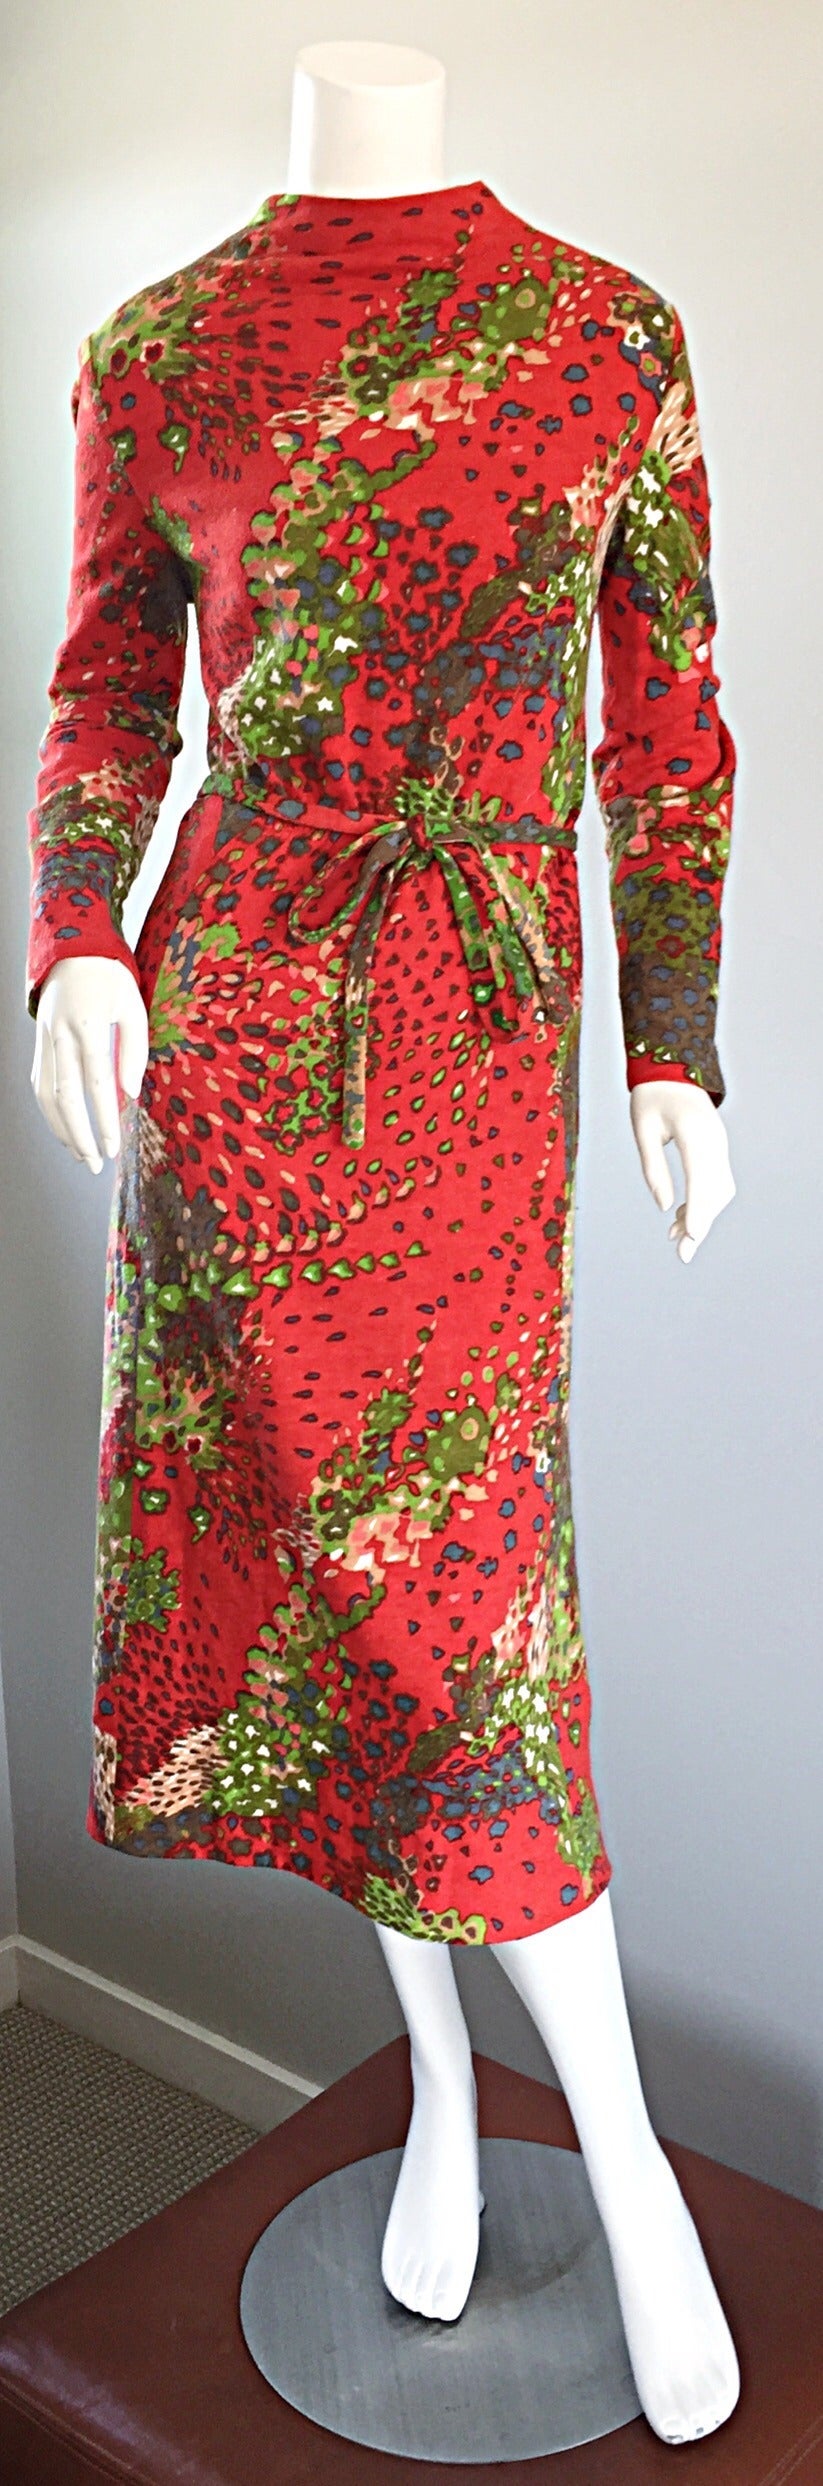 Amazing vintage 60s Pauline Trigere wool dress! Multi colored bright prints, with a matching belt! Wonderful flattering fit. Fully lined, with zipper down the back. Can be worn with the matching belt, or add your own. Easily transitions from day to